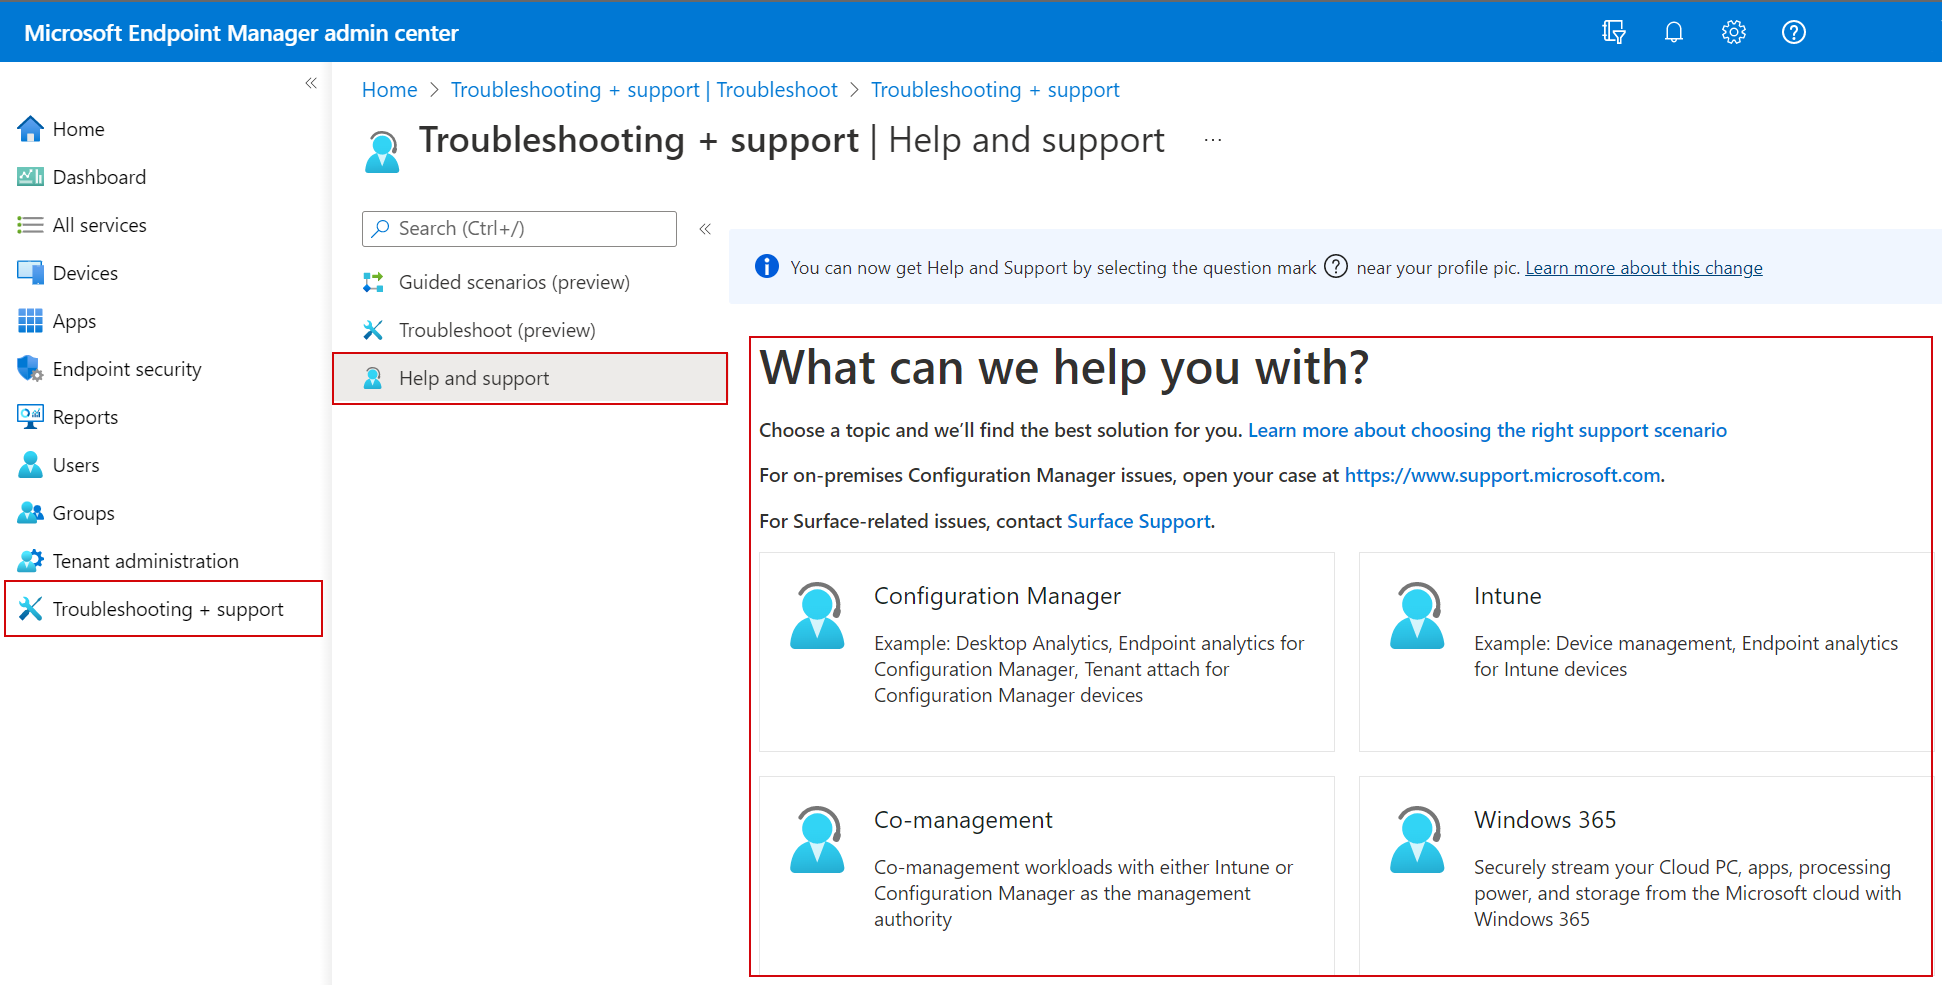 Screenshot that shows how to get to help and support from Troubleshooting and support in the Microsoft Endpoint Manager admin center and Microsoft Intune.